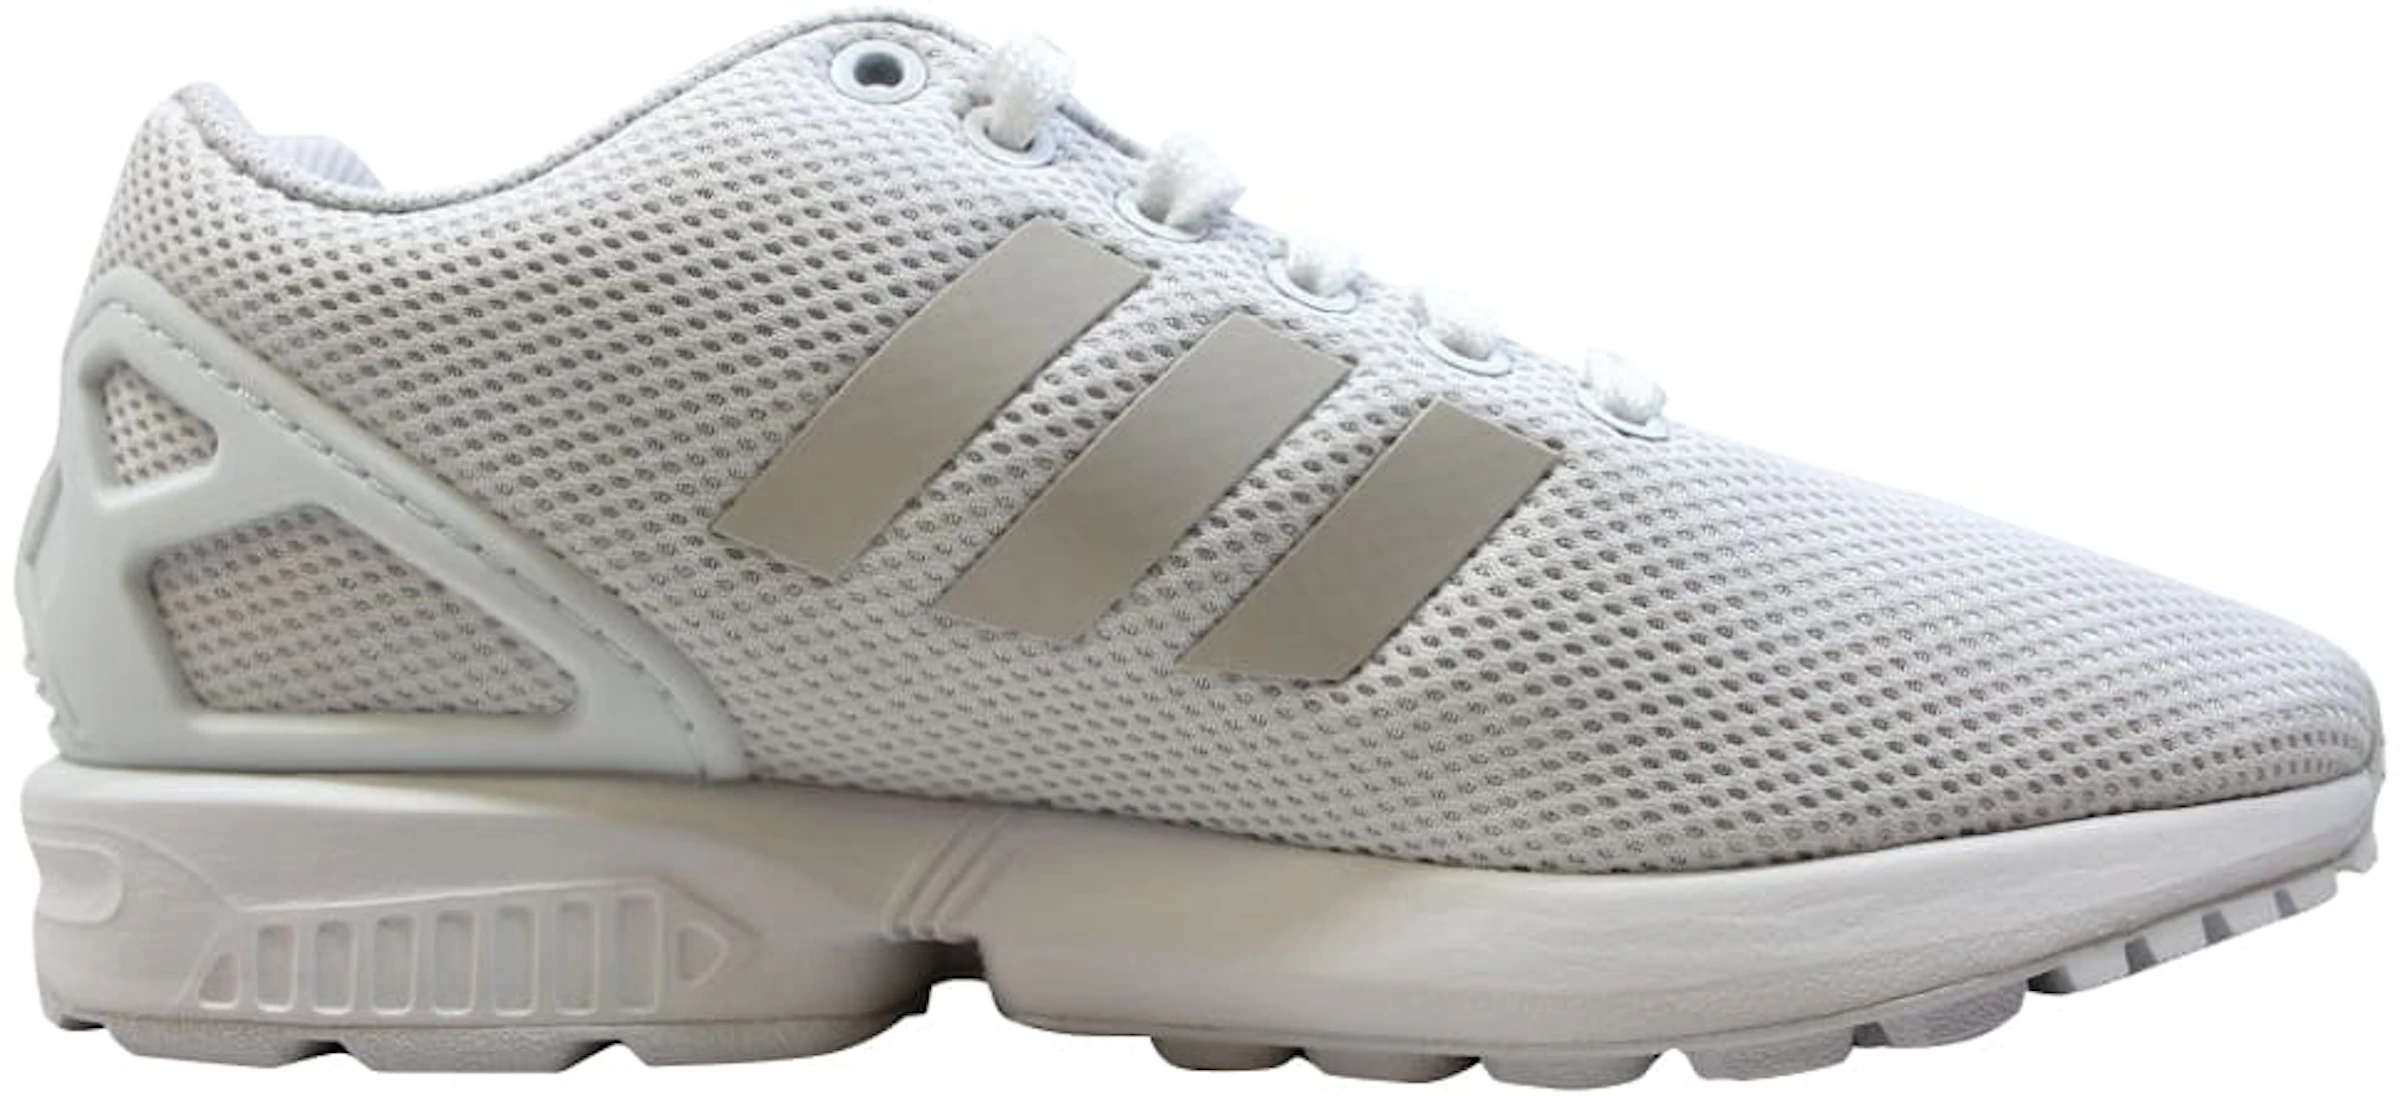 adidas ZX Flux - S79093 - US